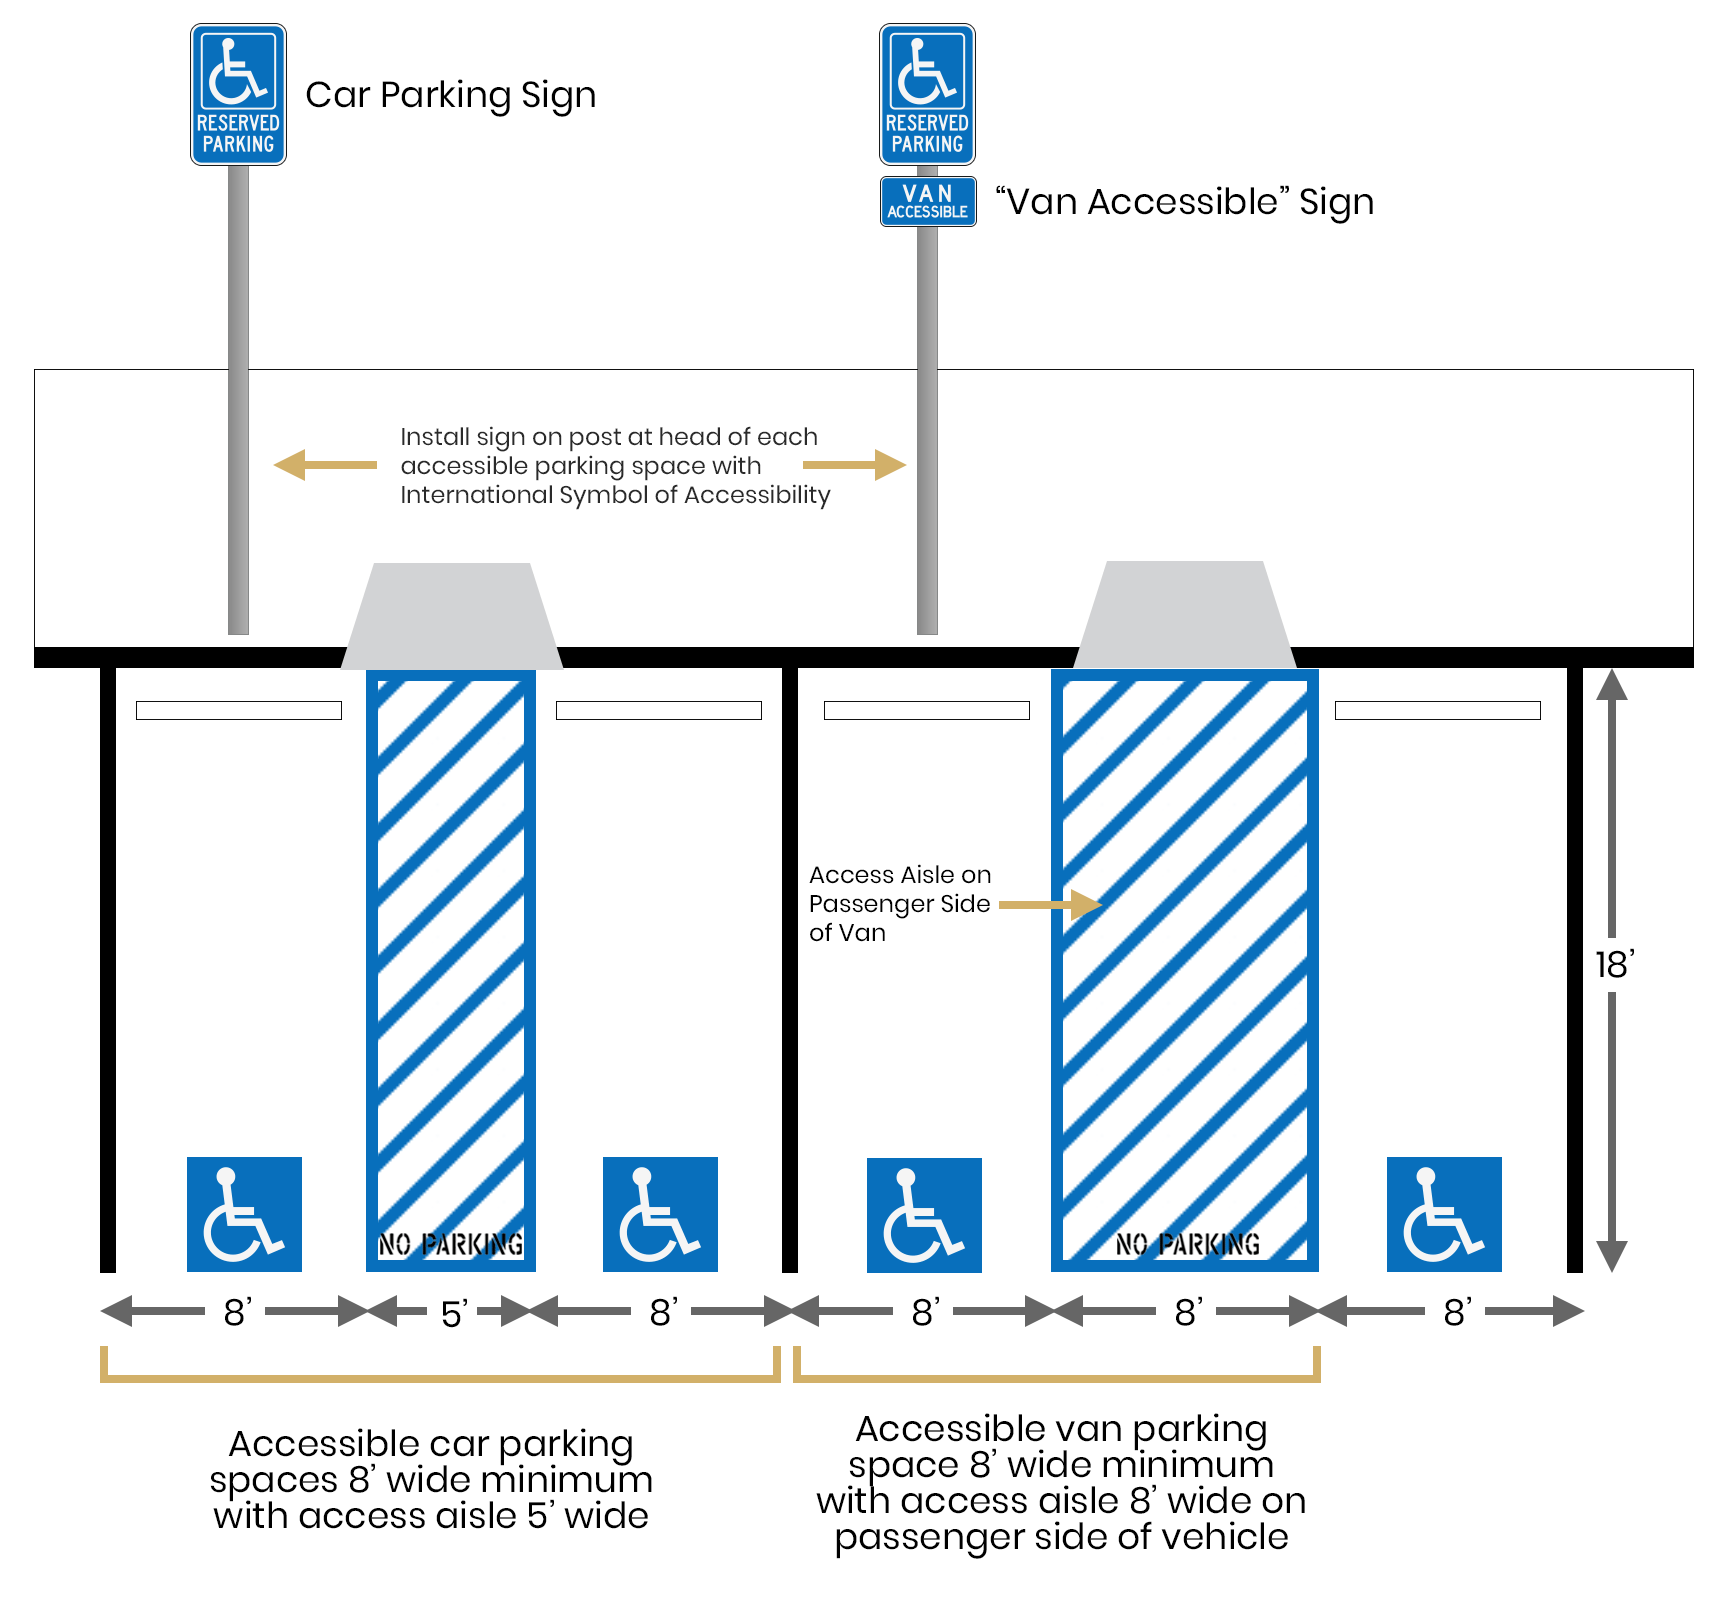 What You Need to Know About ADA Handicap Parking Requirements (+Cheat